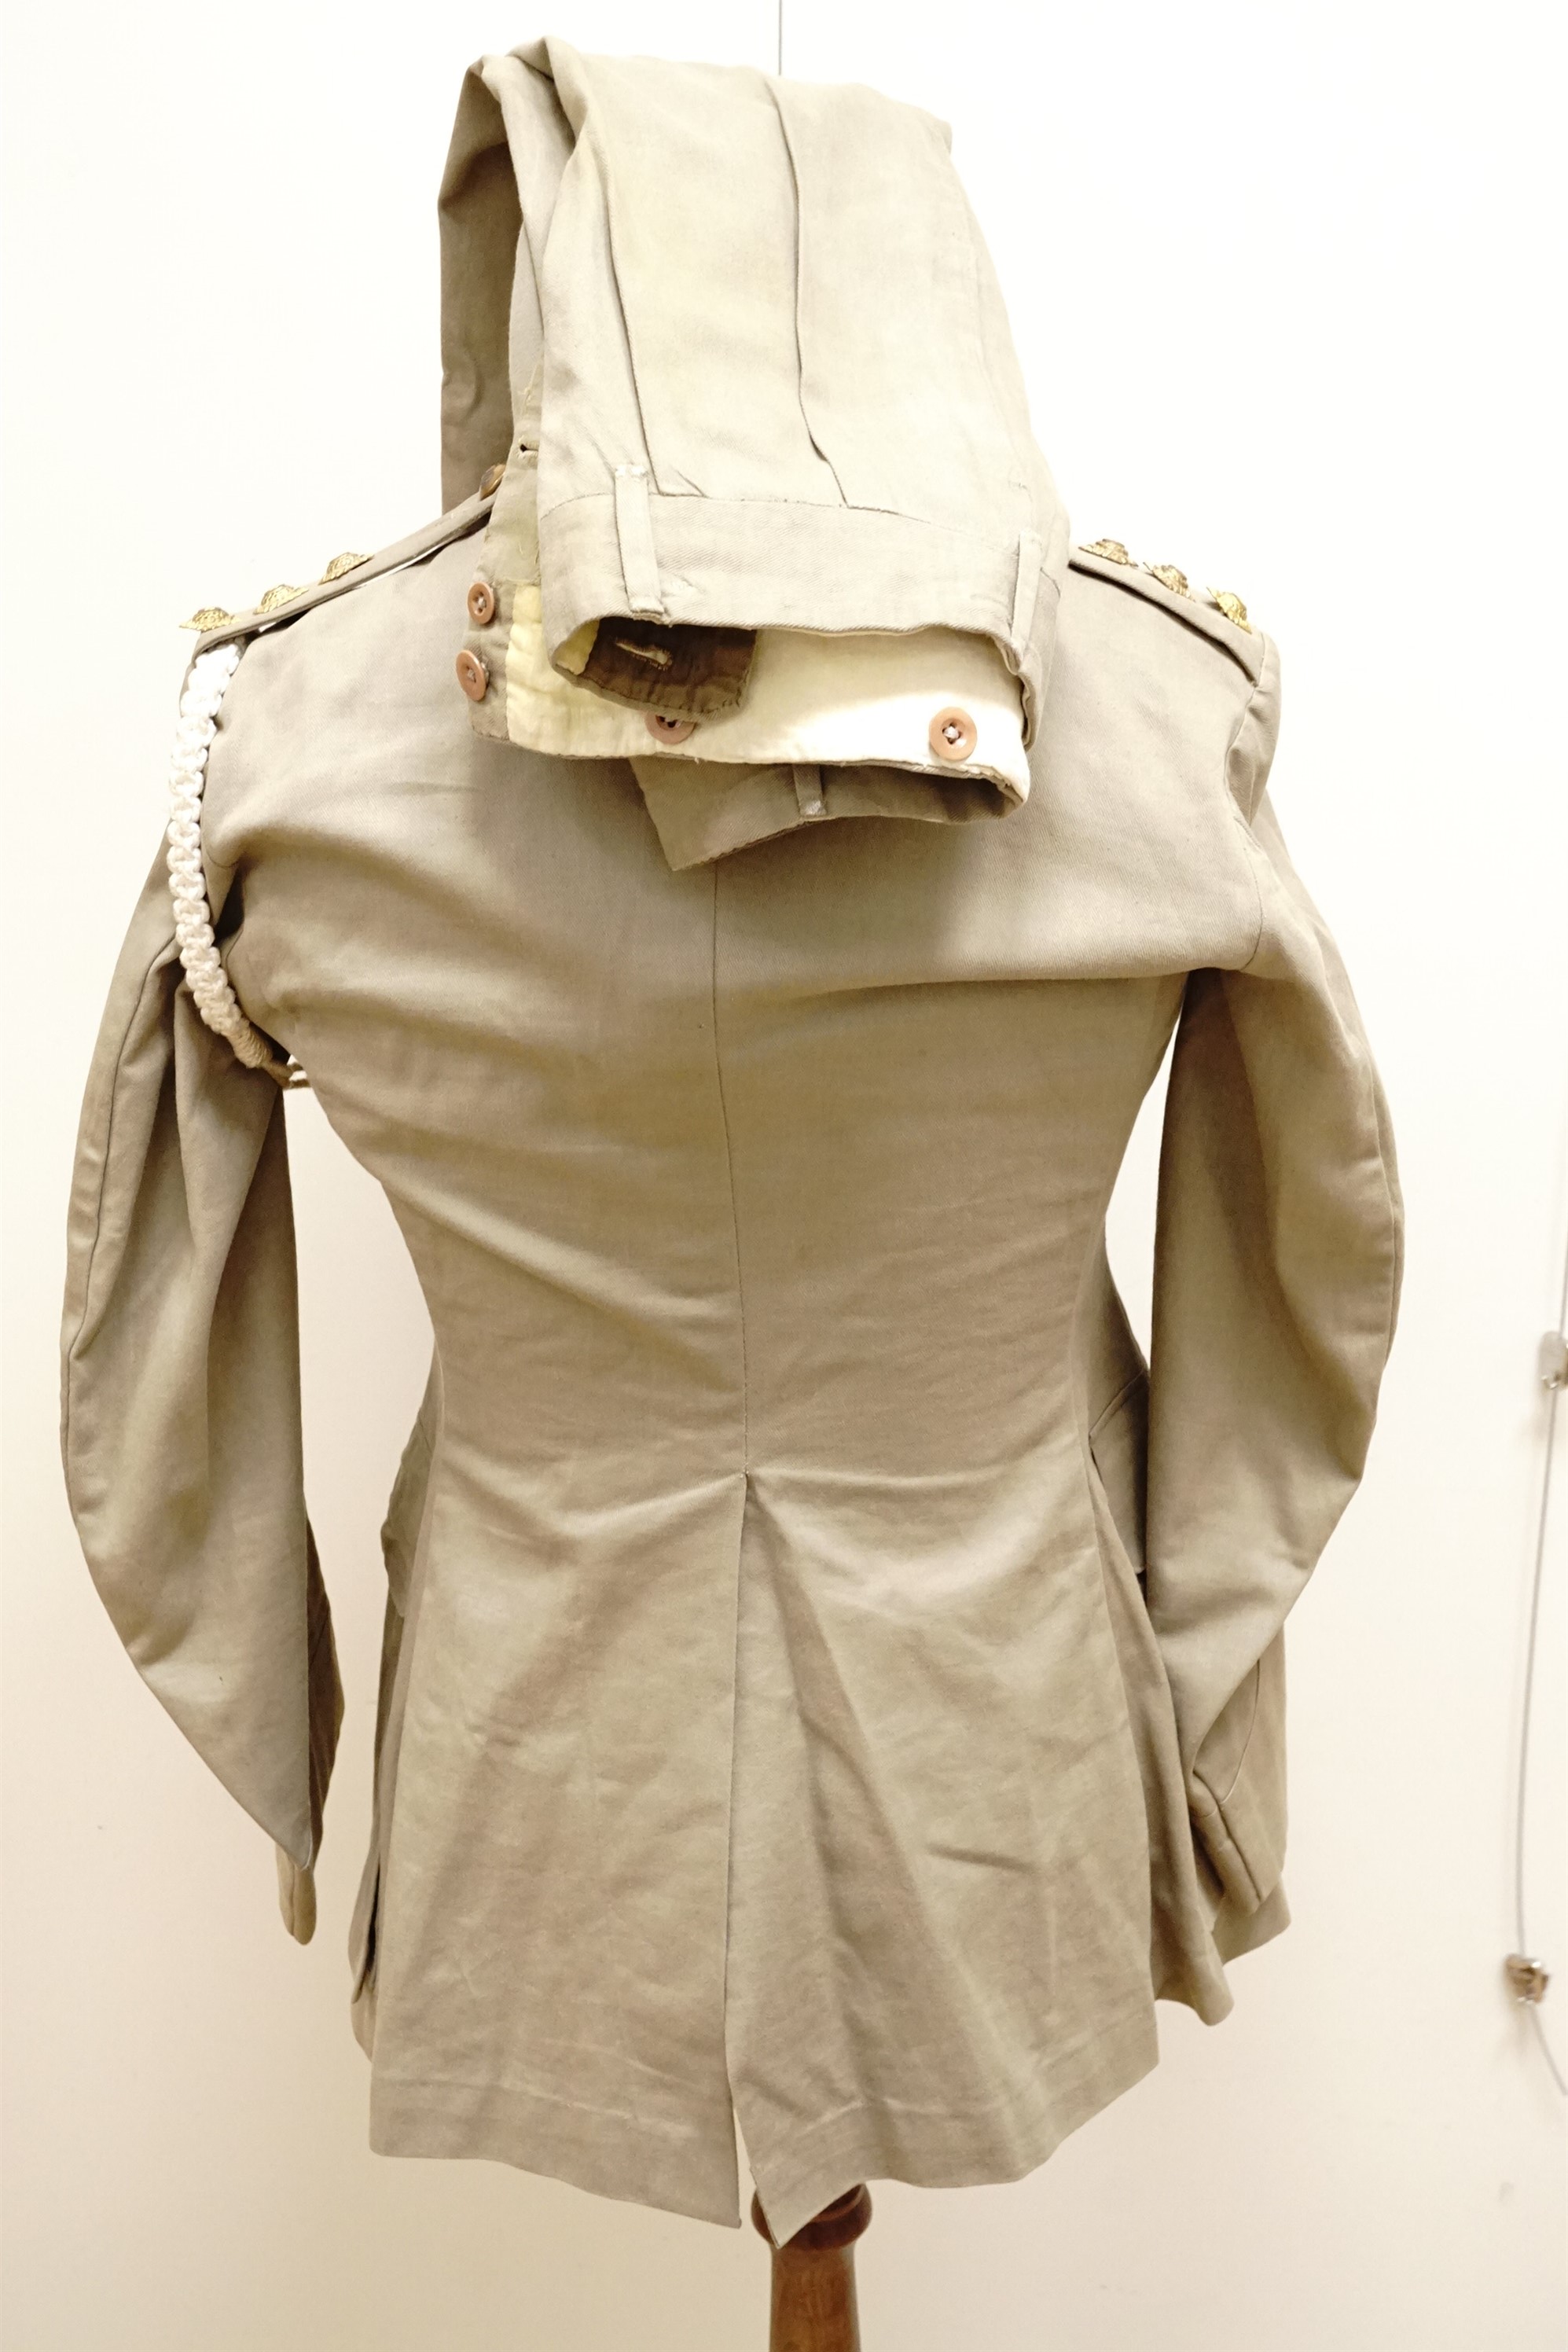 A Yorkshire Dragoons captain's khaki drill tunic and trousers, circa 1940s - Image 2 of 2